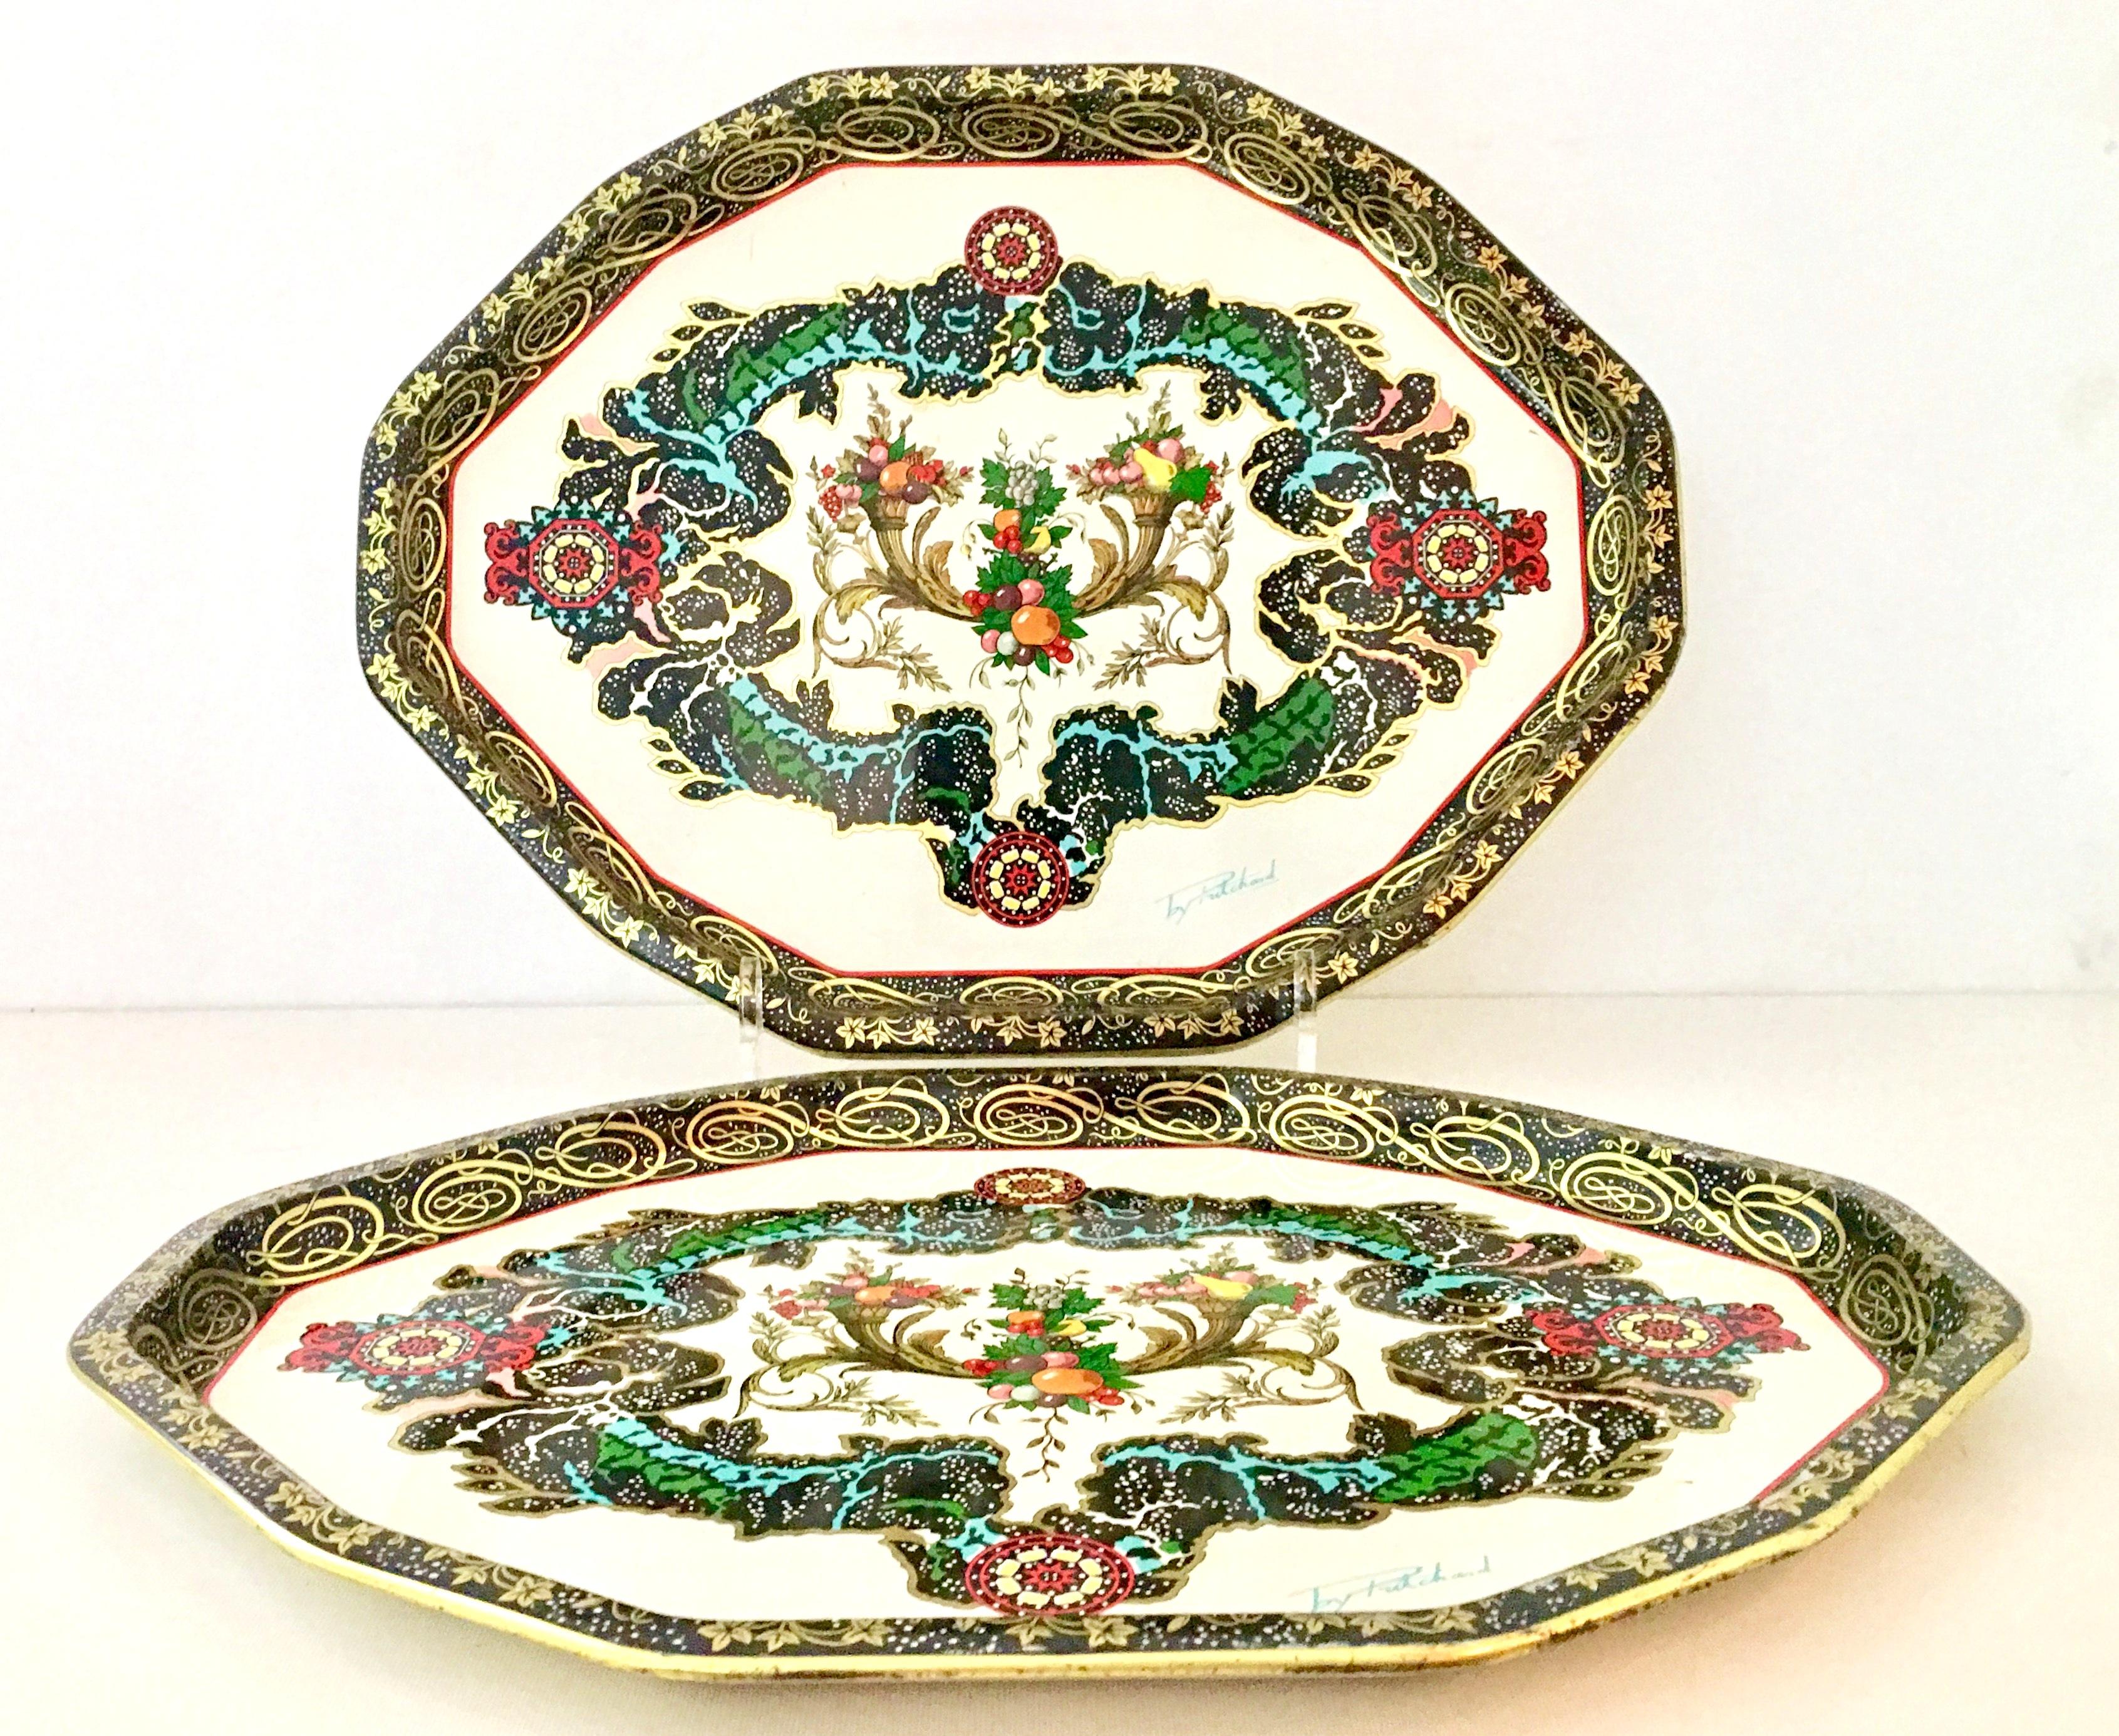 20th Century identical pair of vintage Daher England tin large serving trays designed by, Pritchard. Features a black and gold edge and rim, white ground and central paisley and fruit motif. Vibrant turquoise, green, yellow and pink finish these